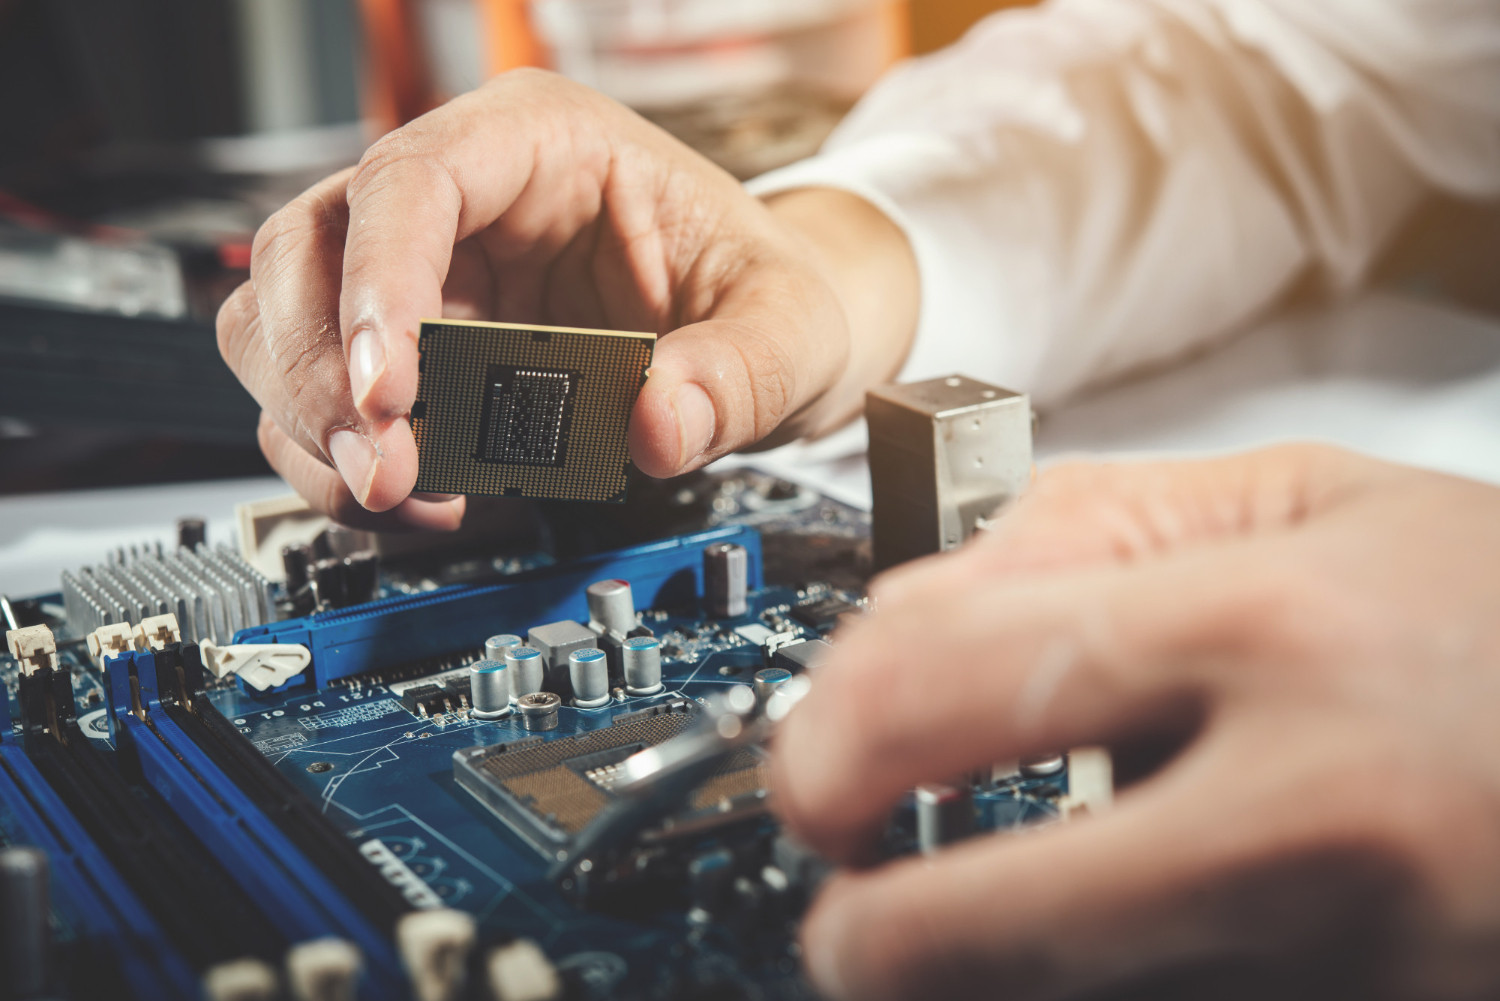 Expert Computer Repair in Omaha, Council Bluffs, and Surrounding Communities: Trustworthy and Reliable Solutions